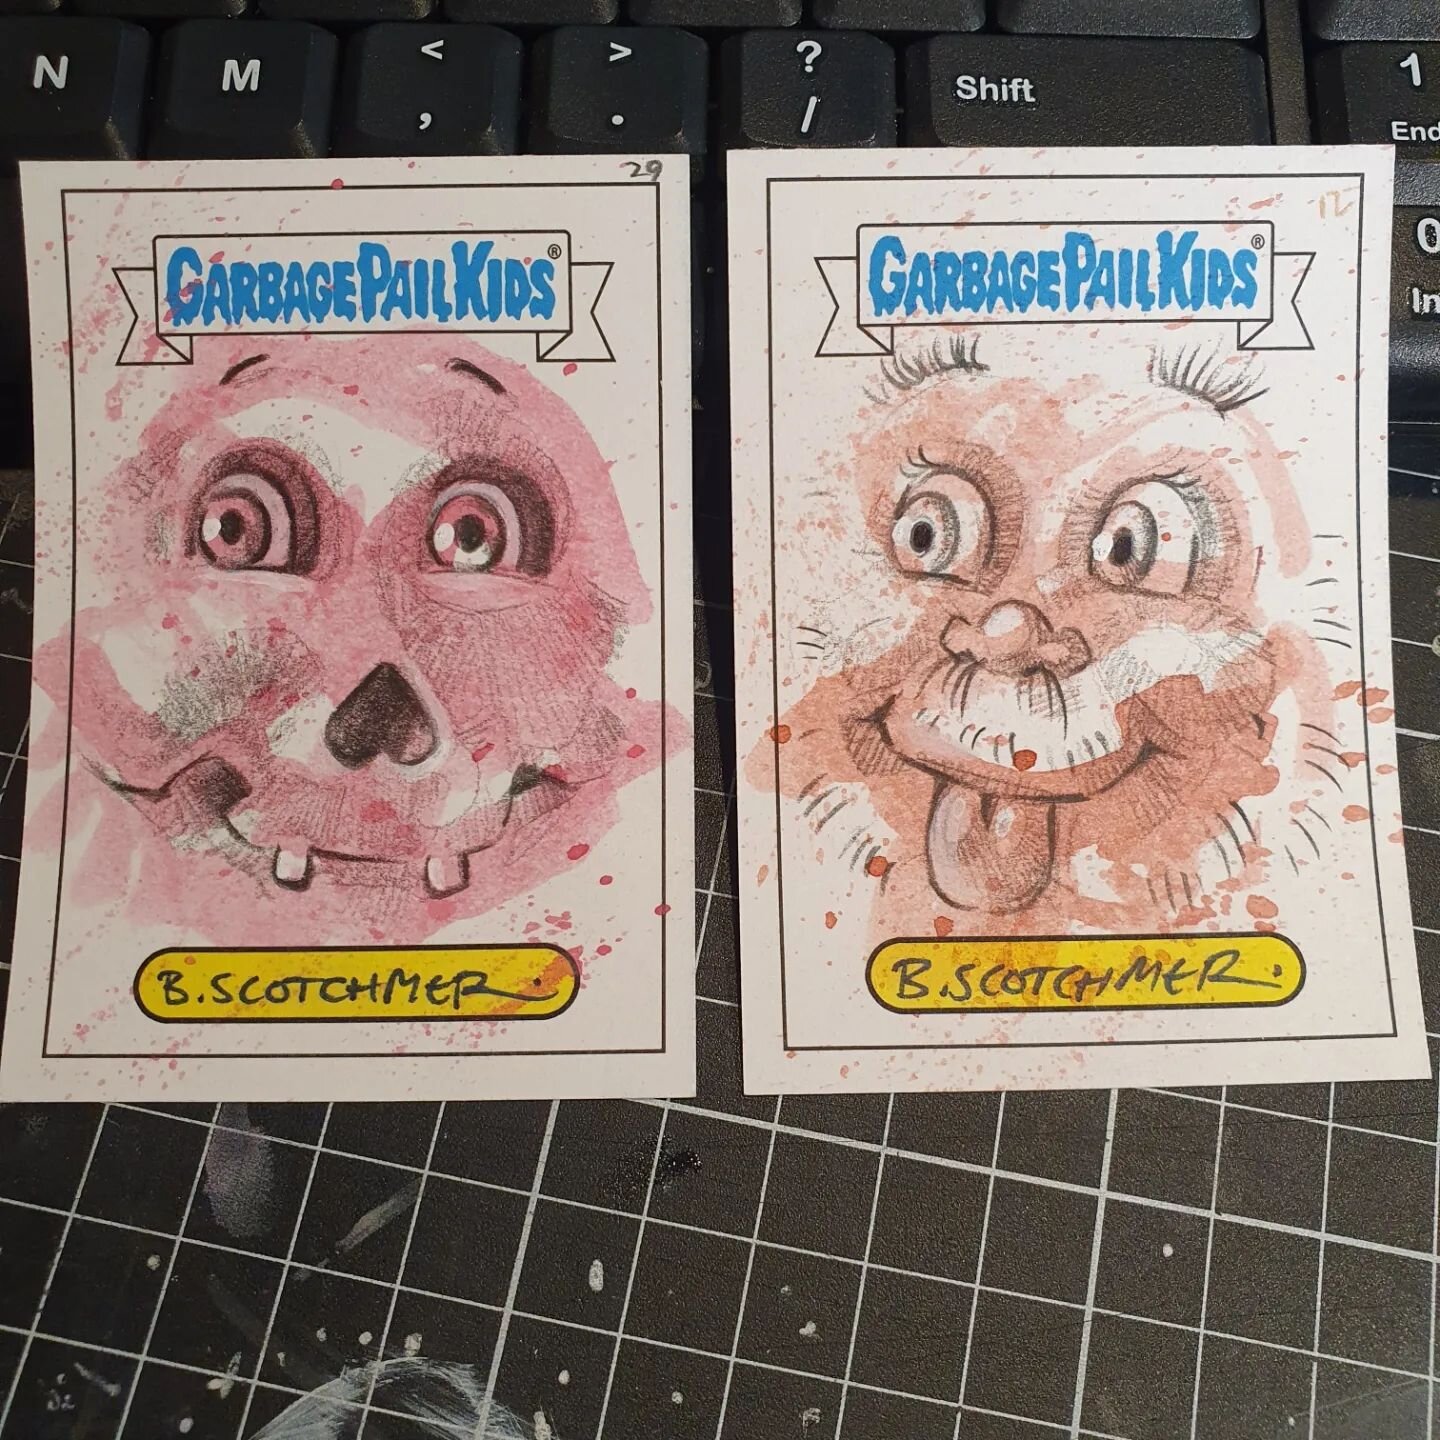 Garbage Pail Kids : Vacation is finally in stores after an extended delay. I did these sketch cards back in June 2021 ! These 1/1 hand painted artworks can be found in packs at your local hobby store, WalMart, Target or wherever you get your @topps t